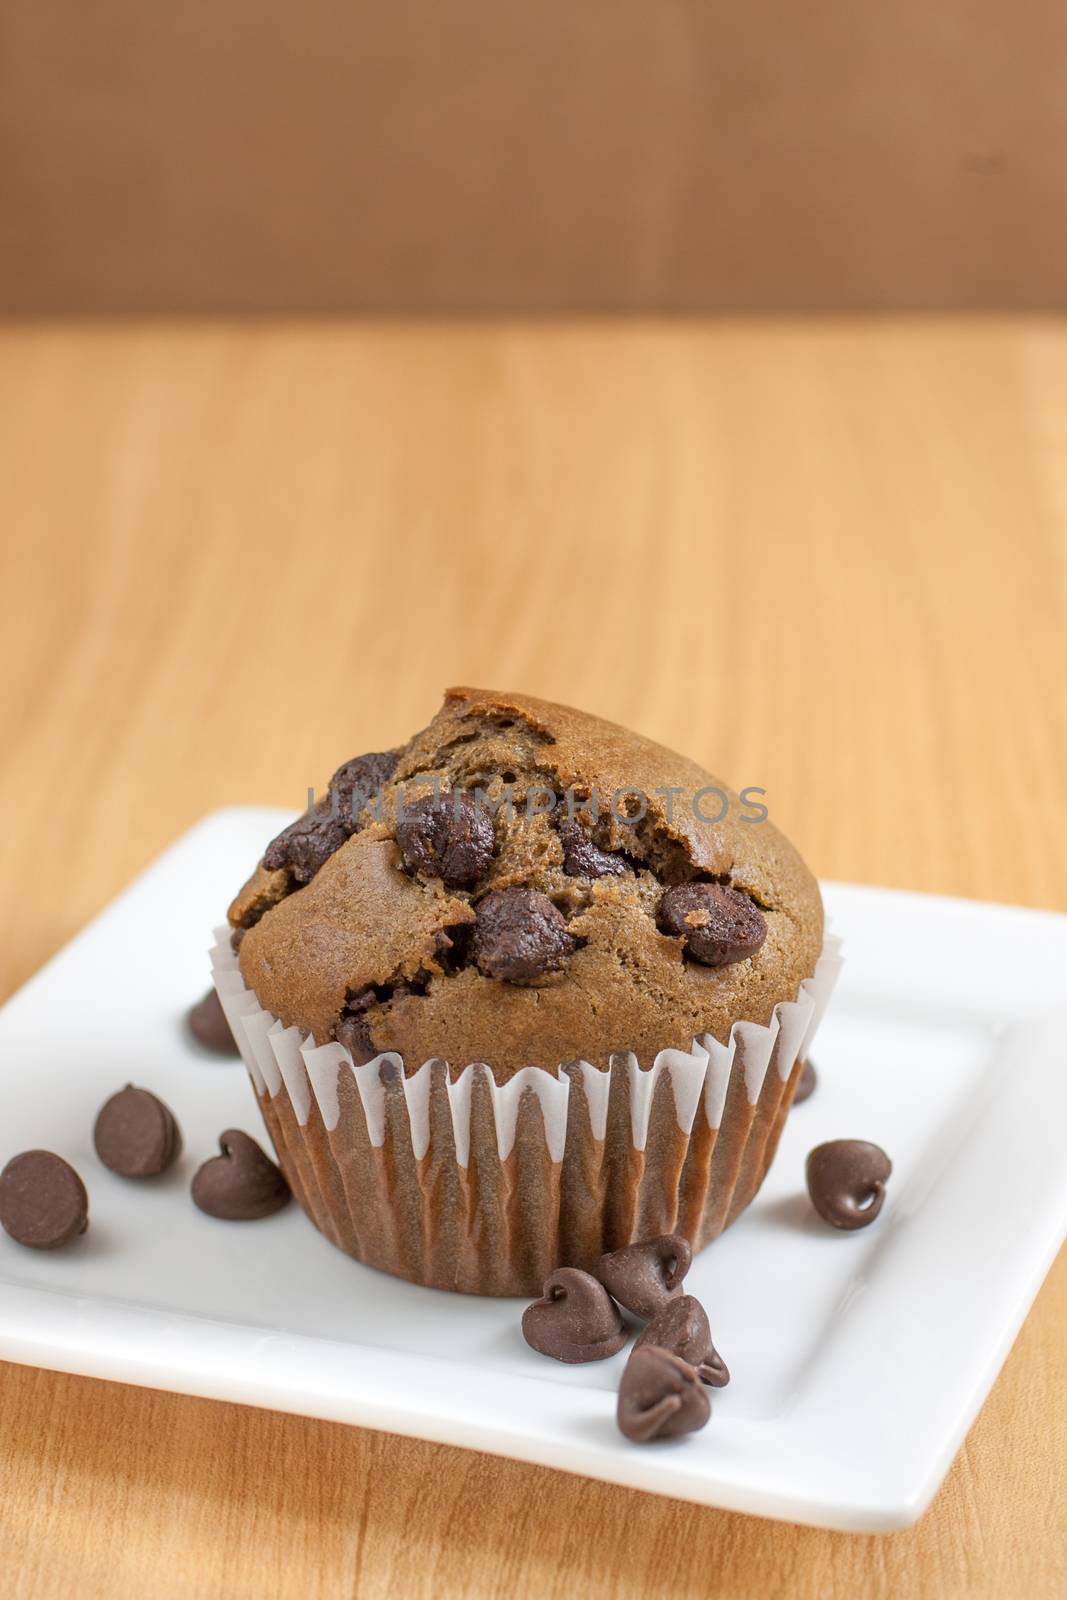 Chocolate Chocolate Chip Muffins by SouthernLightStudios